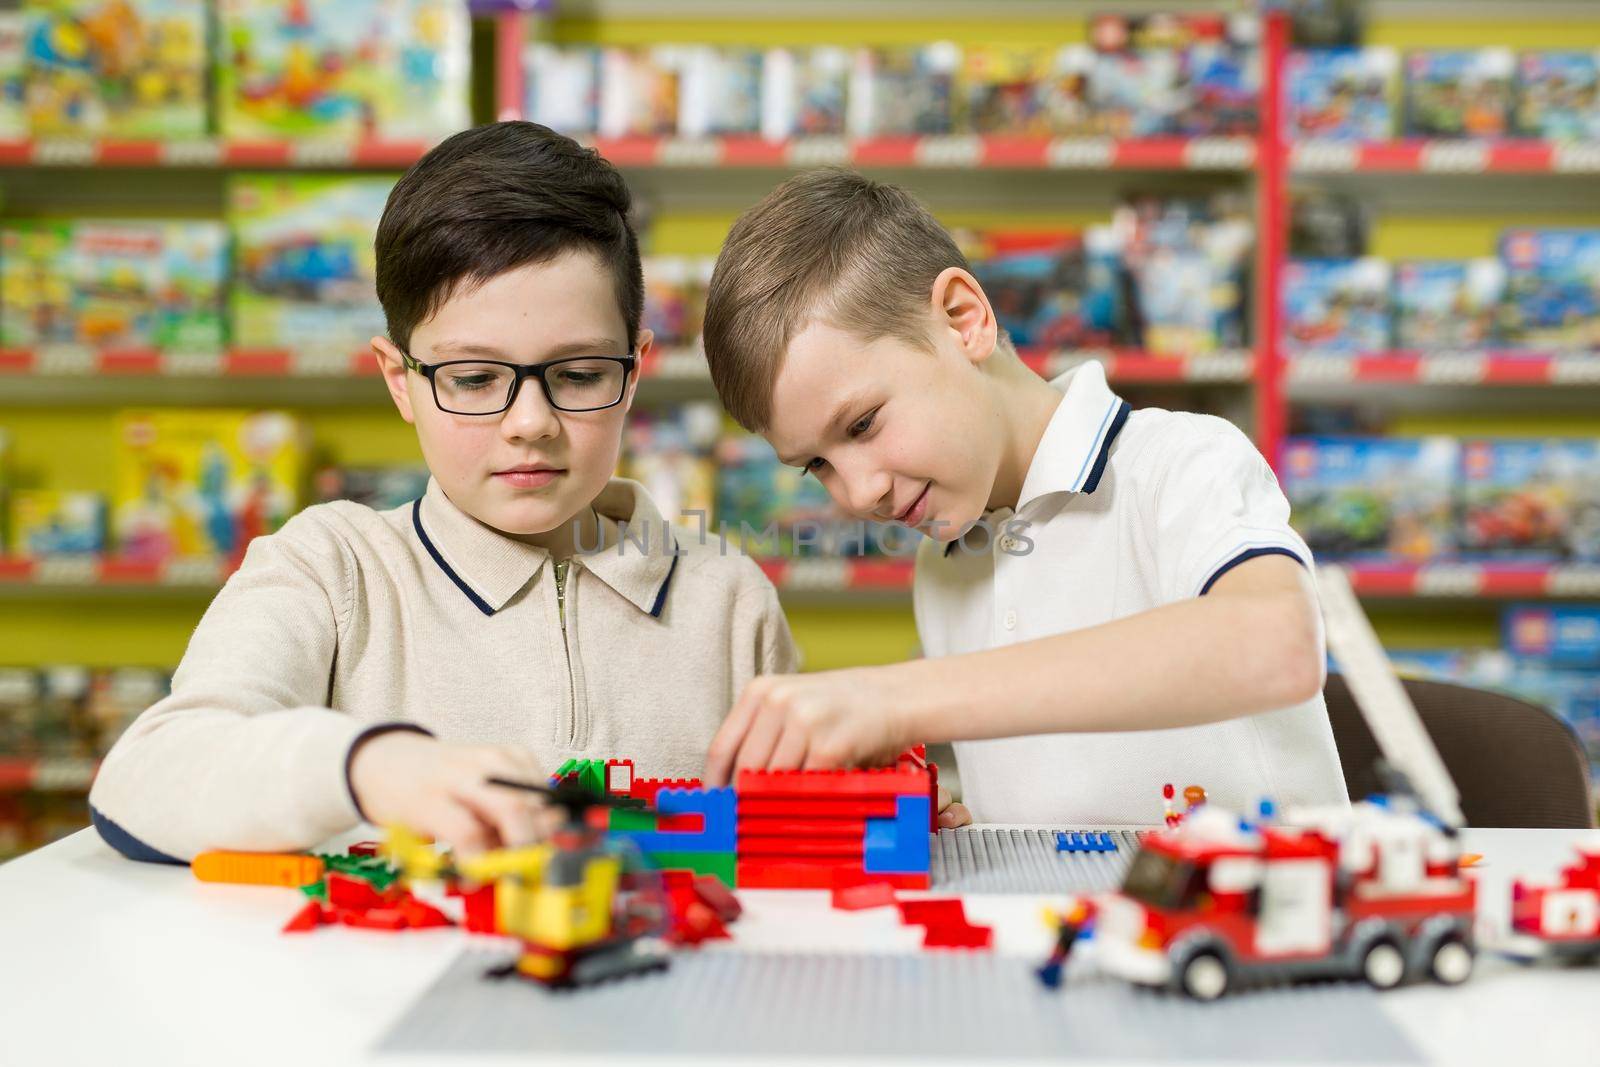 Children play in the designer at the table. Two boys play together with colored plastic blocks in the gaming center, school by StudioPeace